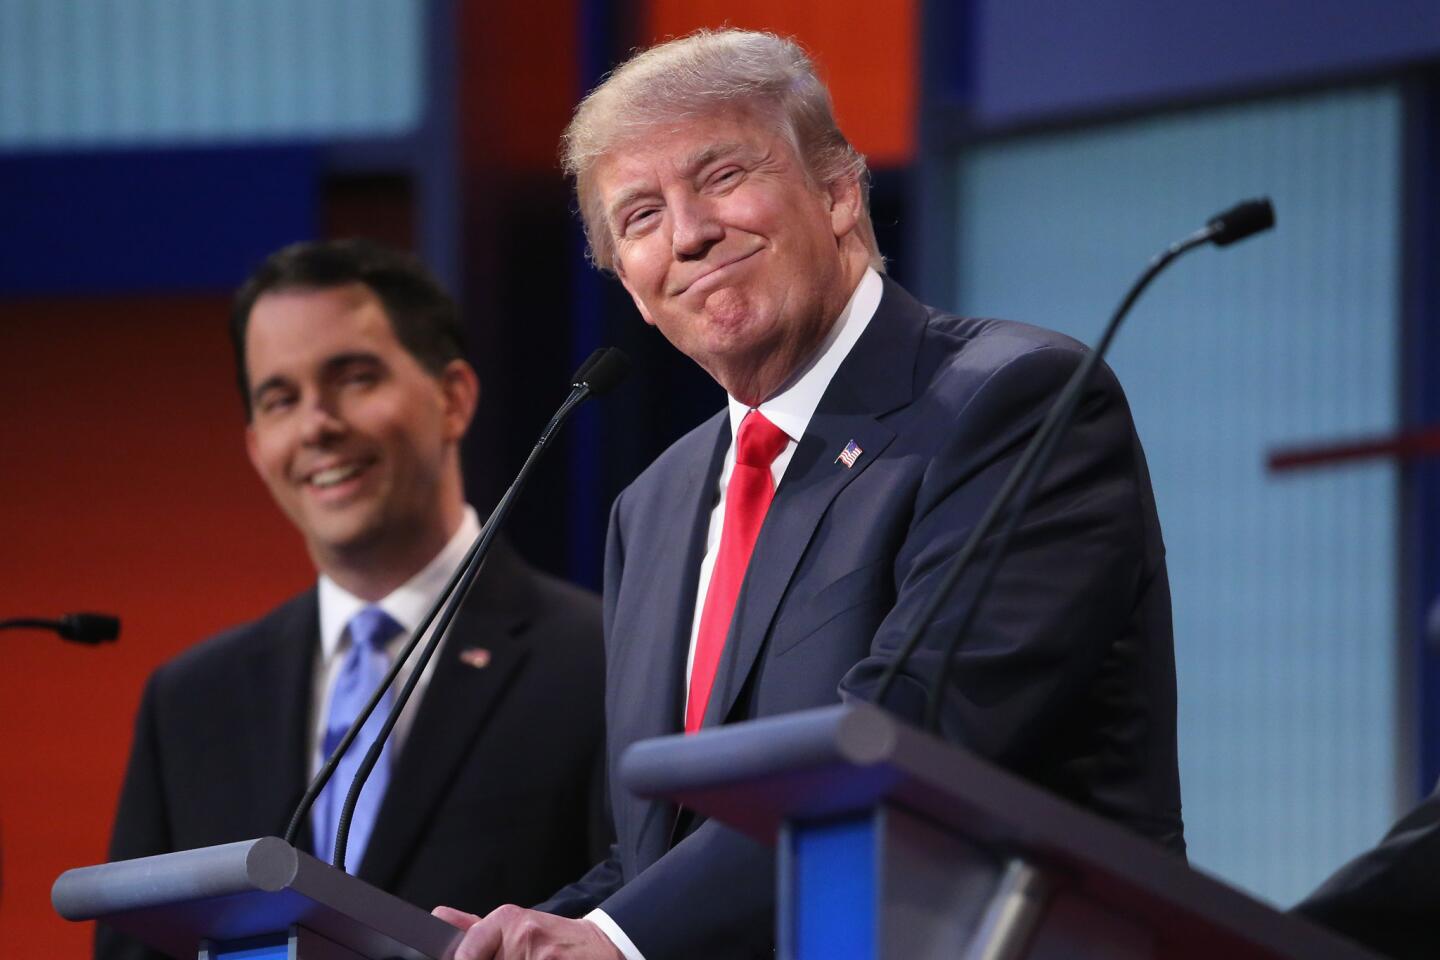 Republican candidates Donald Trump and Wisconsin Gov. Scott Walker participate in the first prime-time presidential debate of the 2016 campaign on Aug. 6, 2015, in Cleveland.